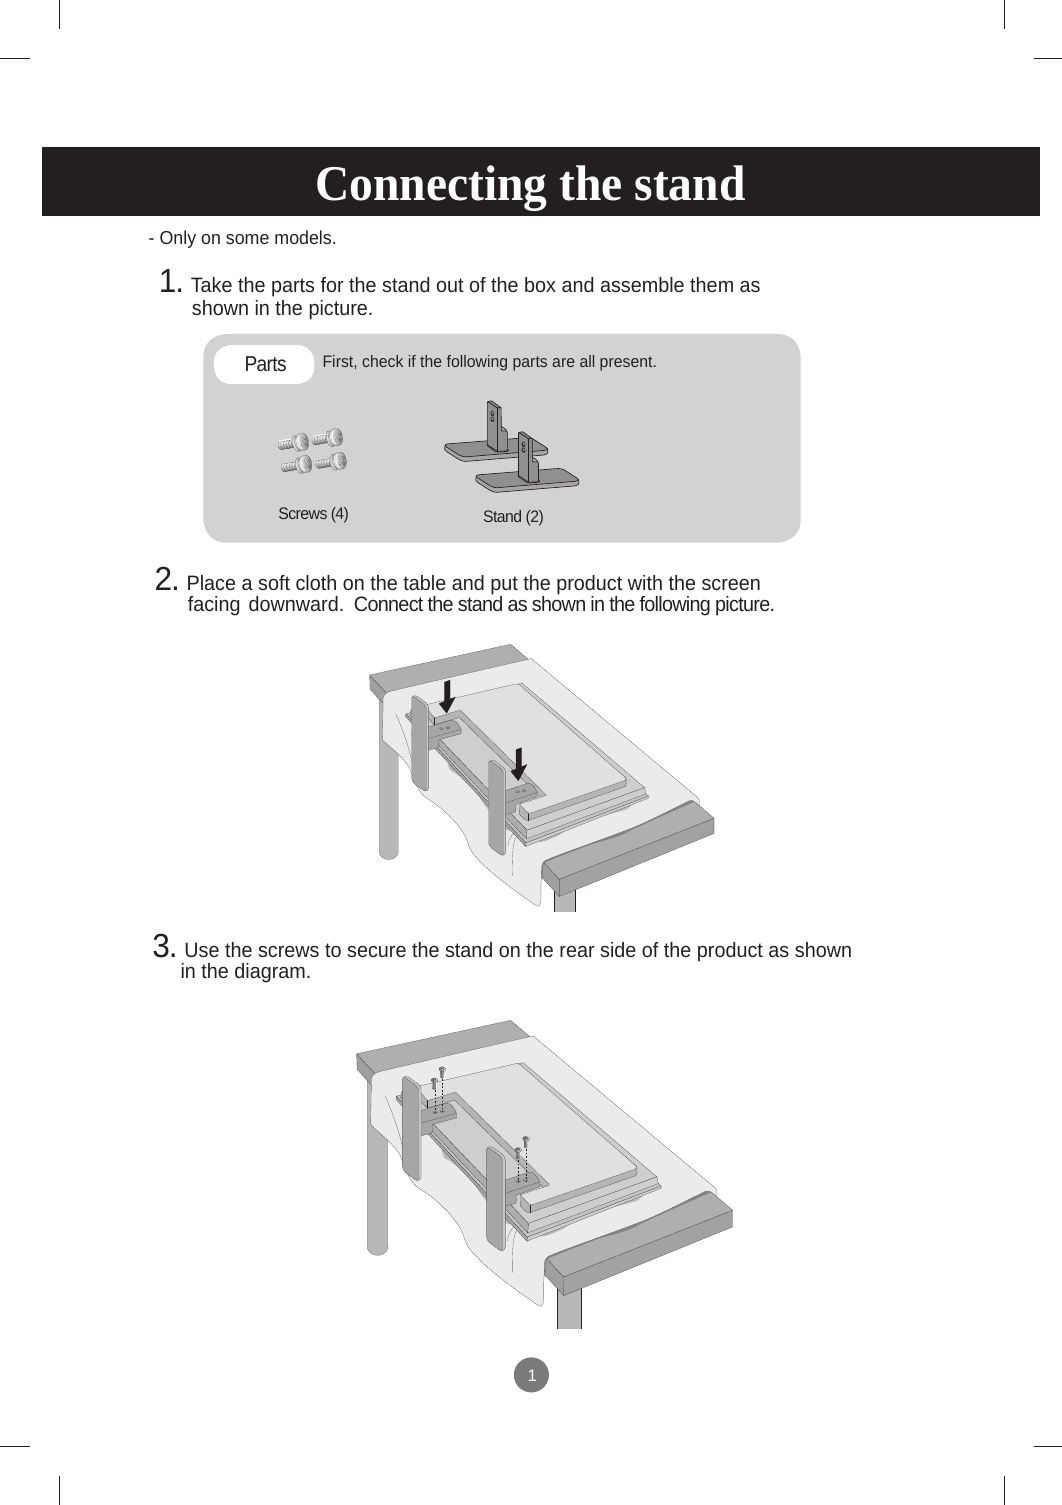 11- Only on some models.Connecting the standFirst, check if the following parts are all present.Stand (2)Screws (4)Parts 1. Take the parts for the stand out of the box and assemble them as         shown in the picture.2. Place a soft cloth on the table and put the product with the screen      facing  downward.  Connect the stand as shown in the following picture.  3. Use the screws to secure the stand on the rear side of the product as shown in the diagram.